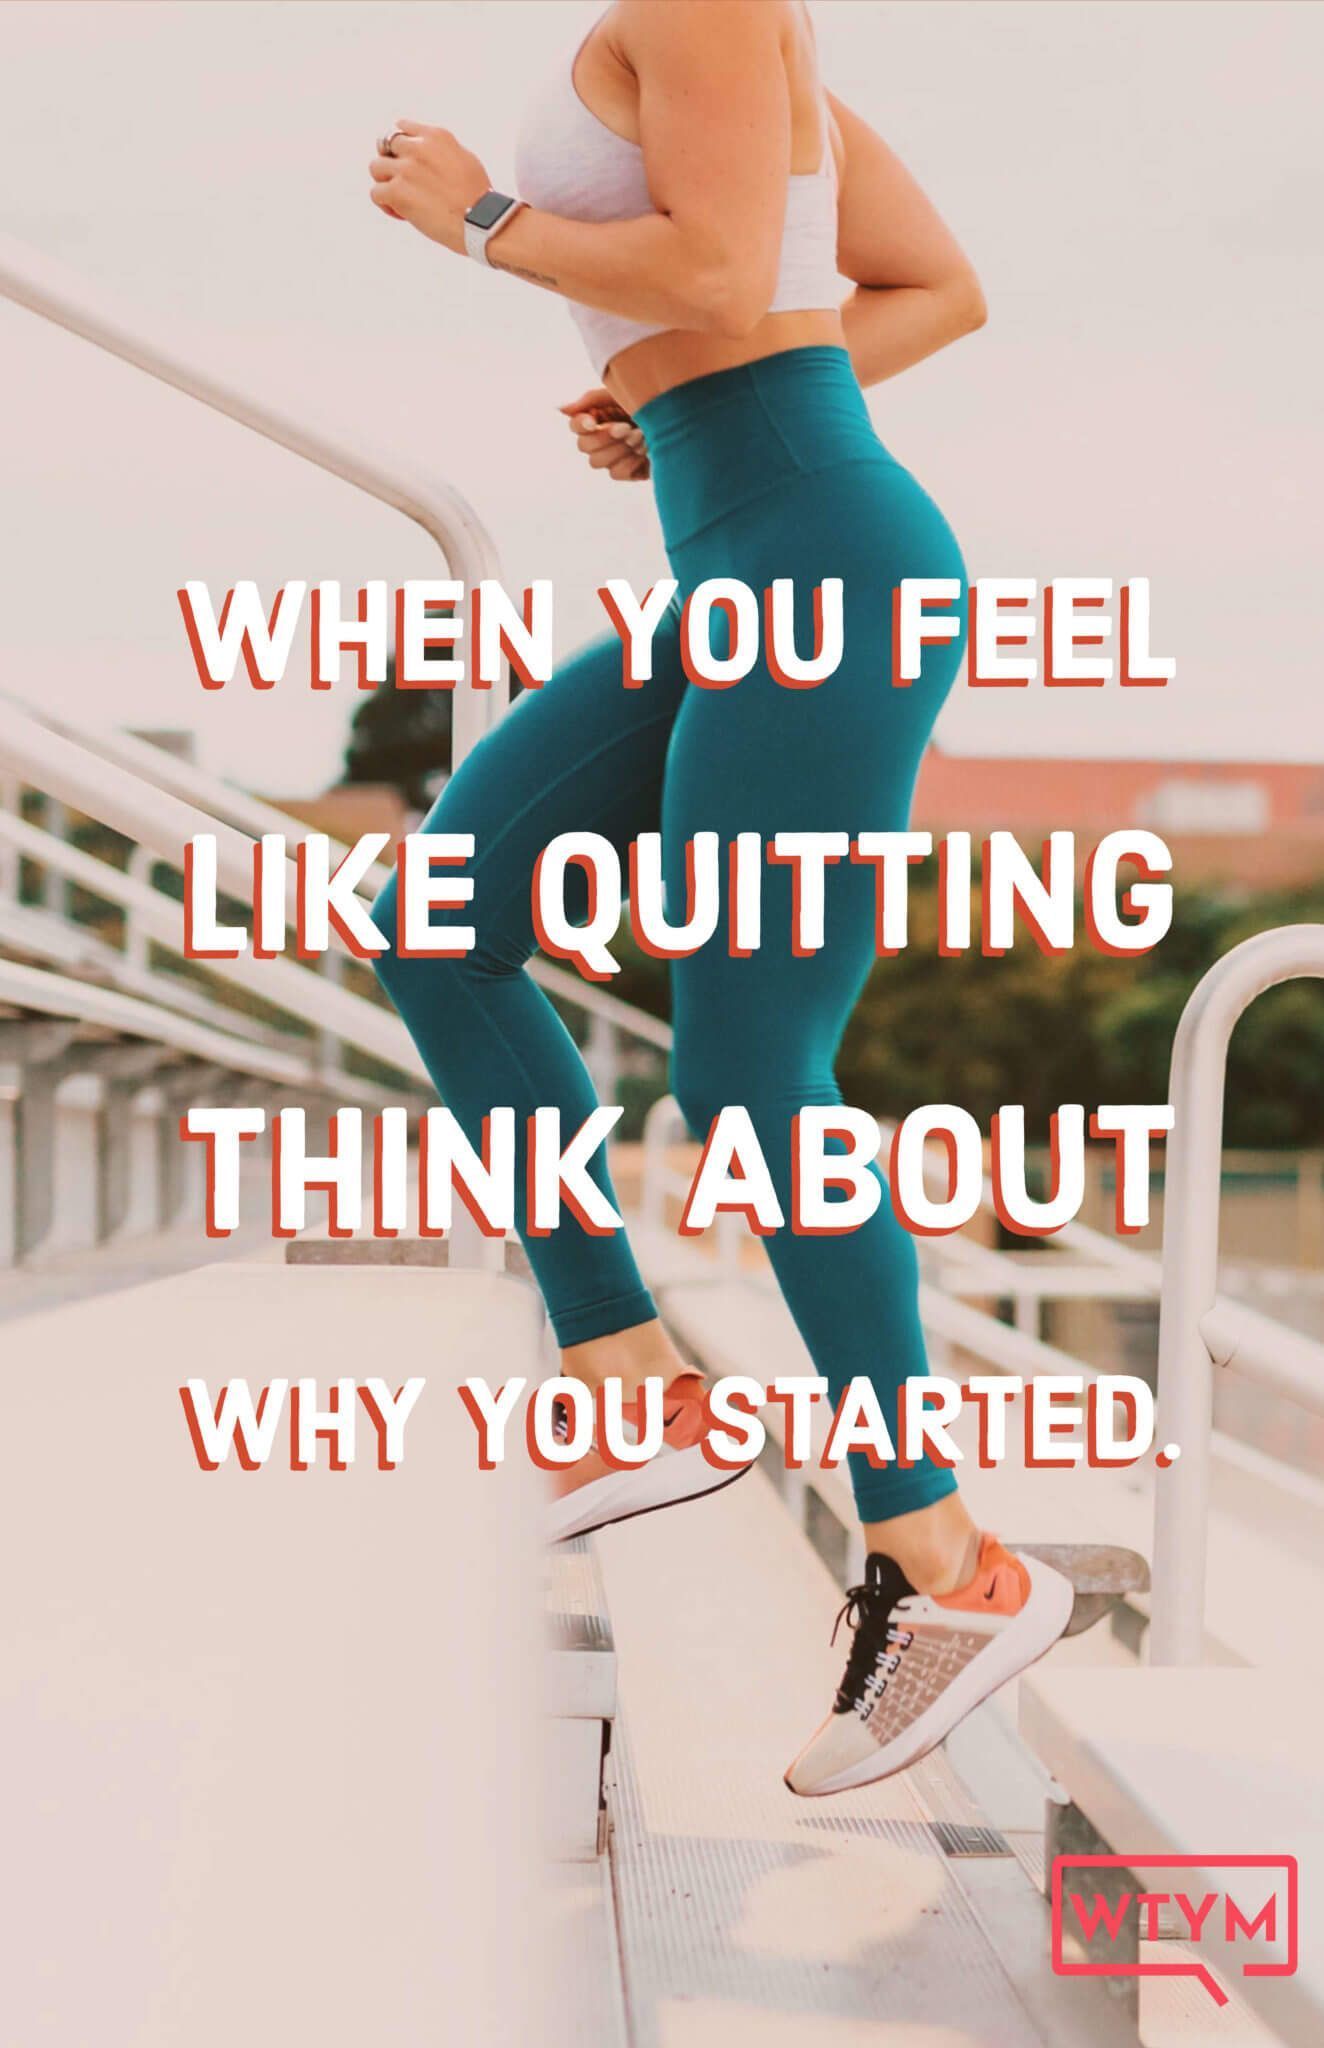 12 Weight Loss Motivational Quotes You Need When You Want To Quit - 12 Weight Loss Motivational Quotes You Need When You Want To Quit -   16 fitness Quotes weights ideas